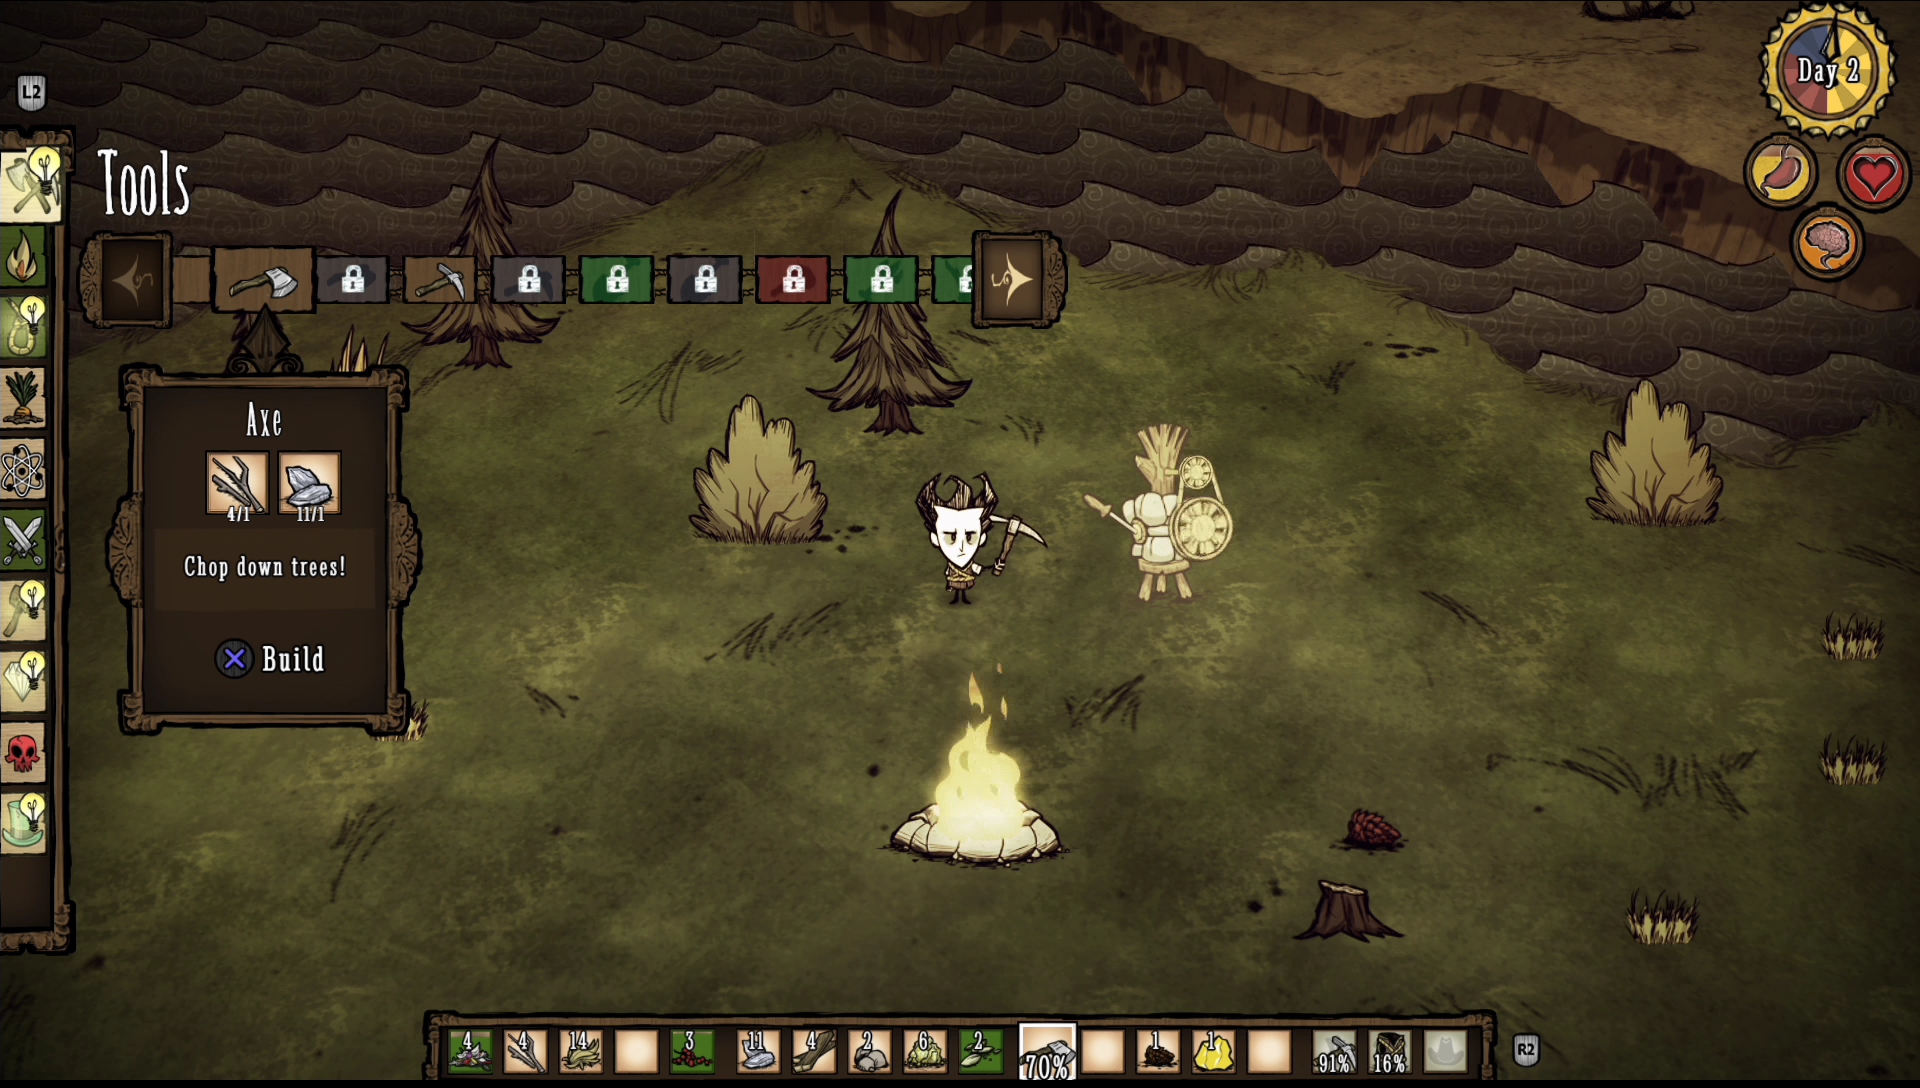 dont starve together switch from survival to endless